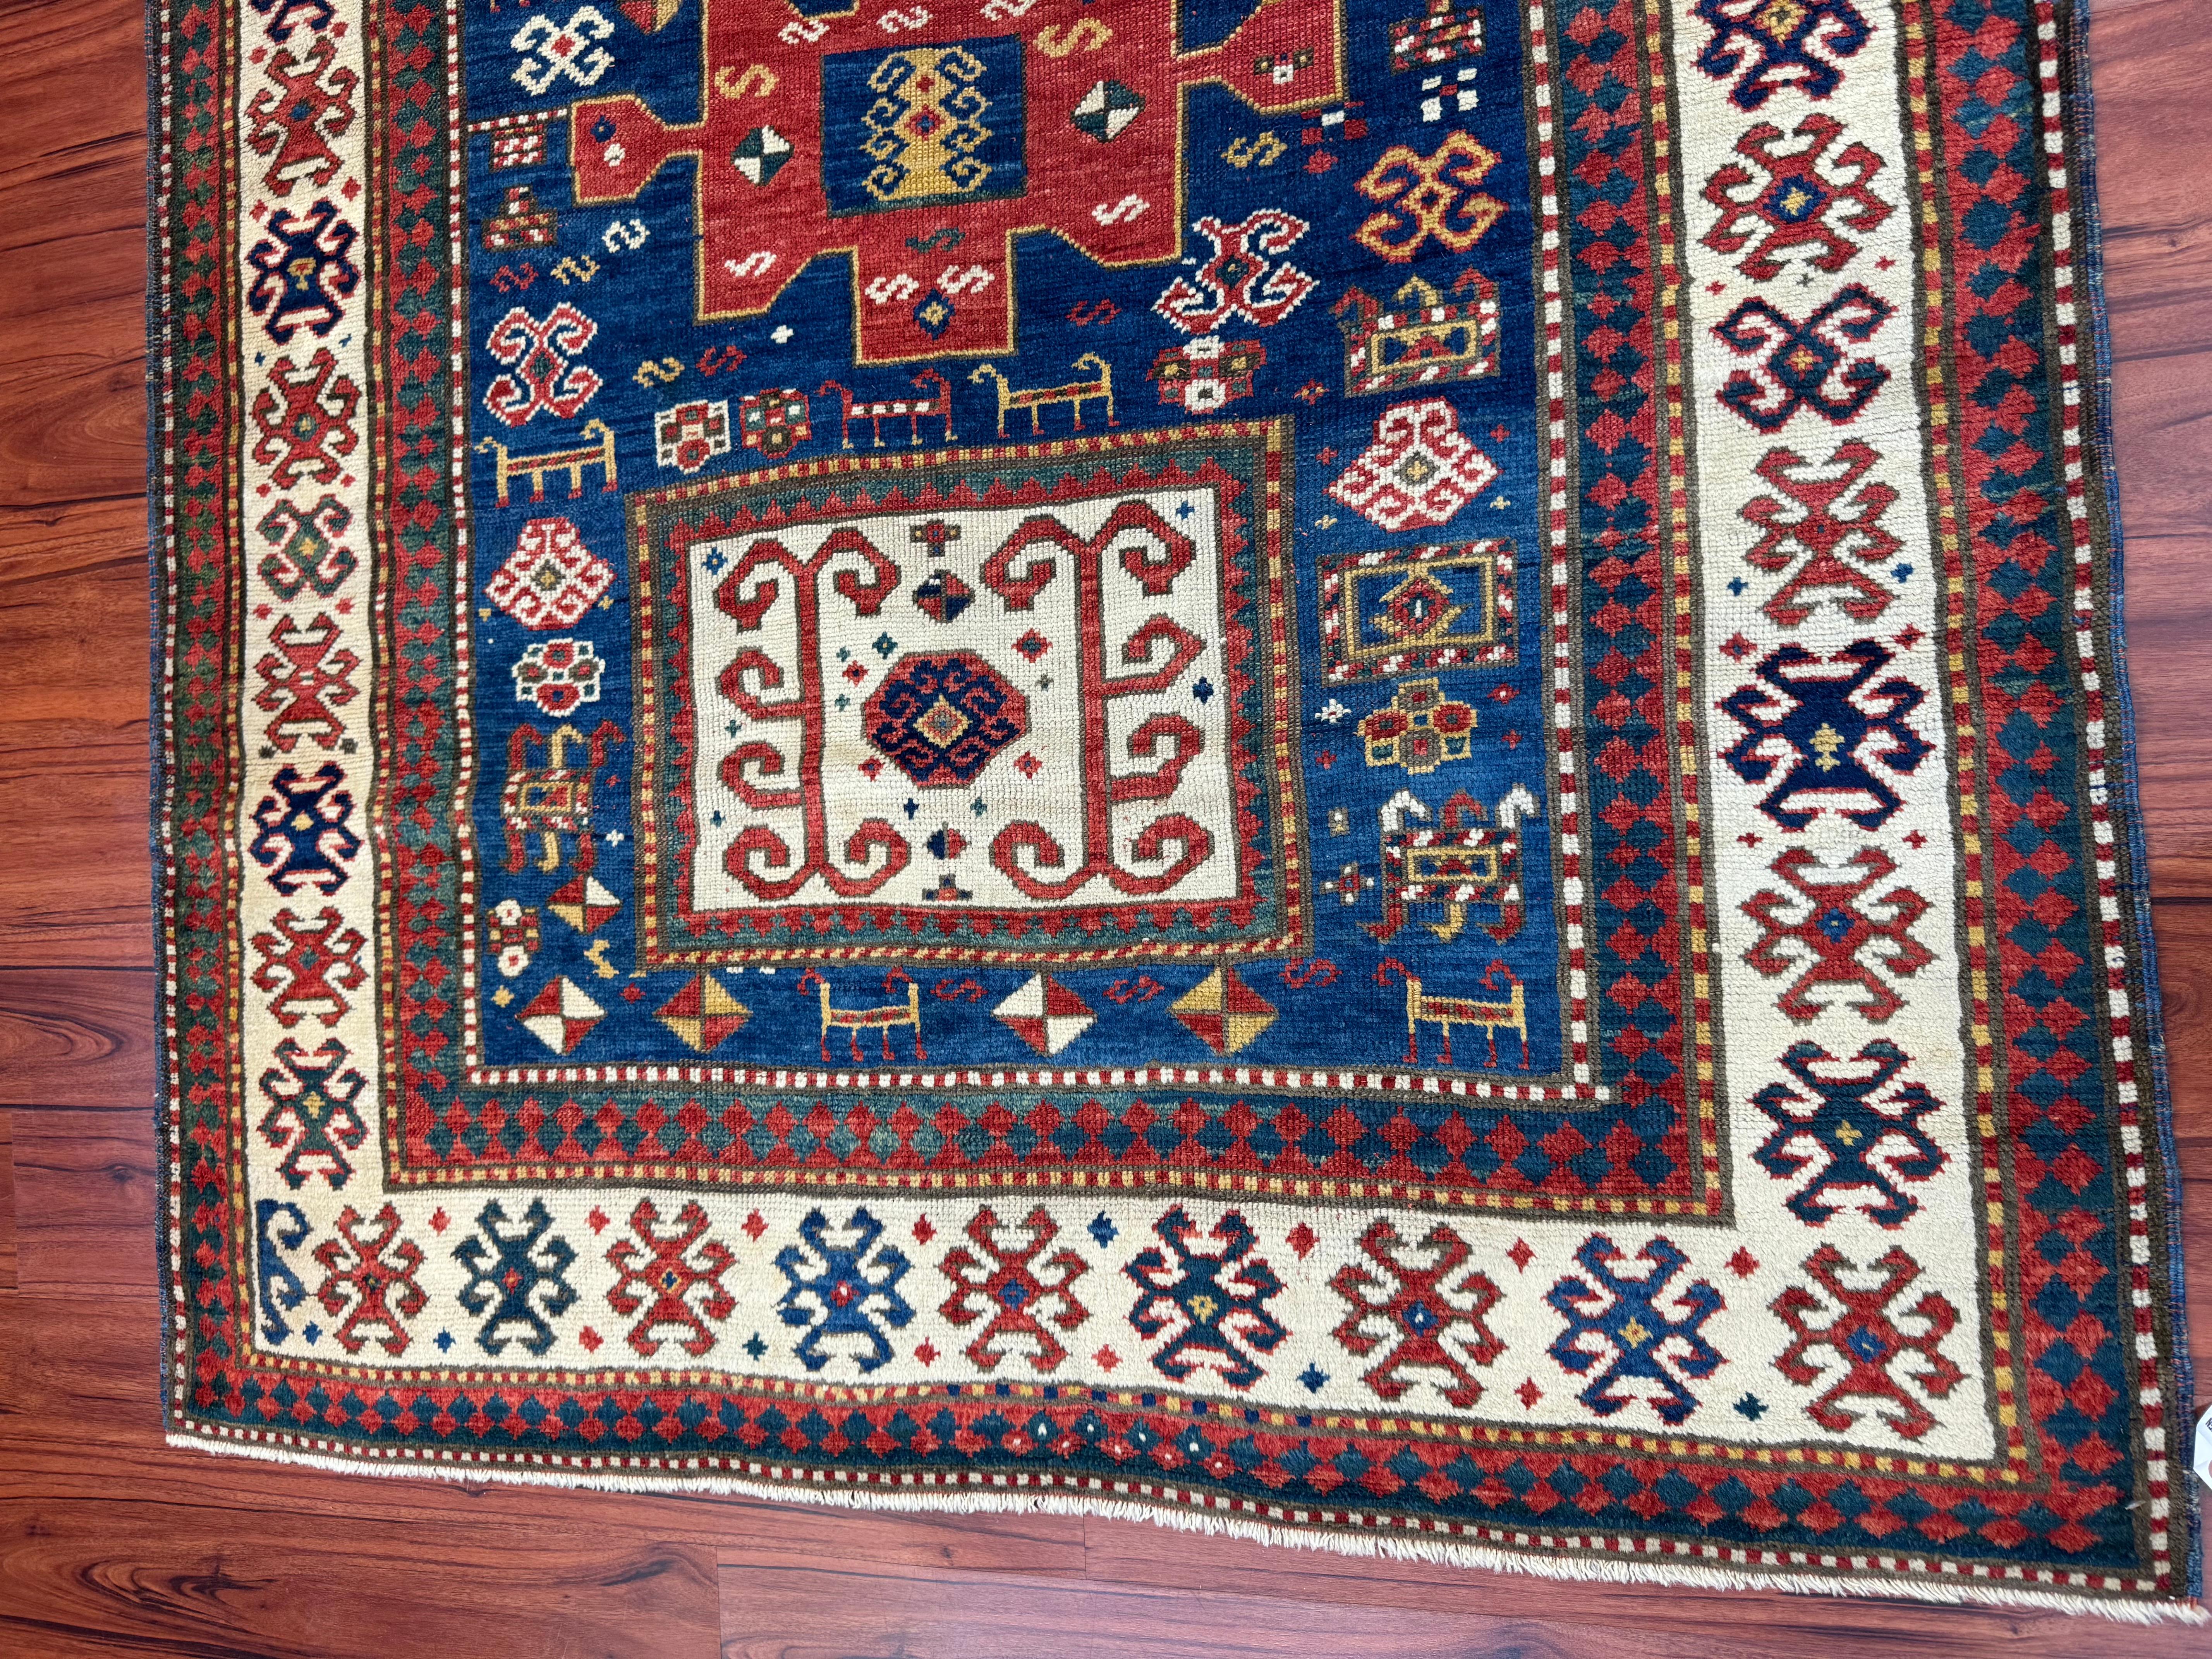 A stunning Karachov Kazak rug that originates from Russia in the 19th century. This rug has a rich history and is in excellent condition! The measurements are 4’9” by 6’’9”ft. Feel free to message me for any questions about this listing or any other